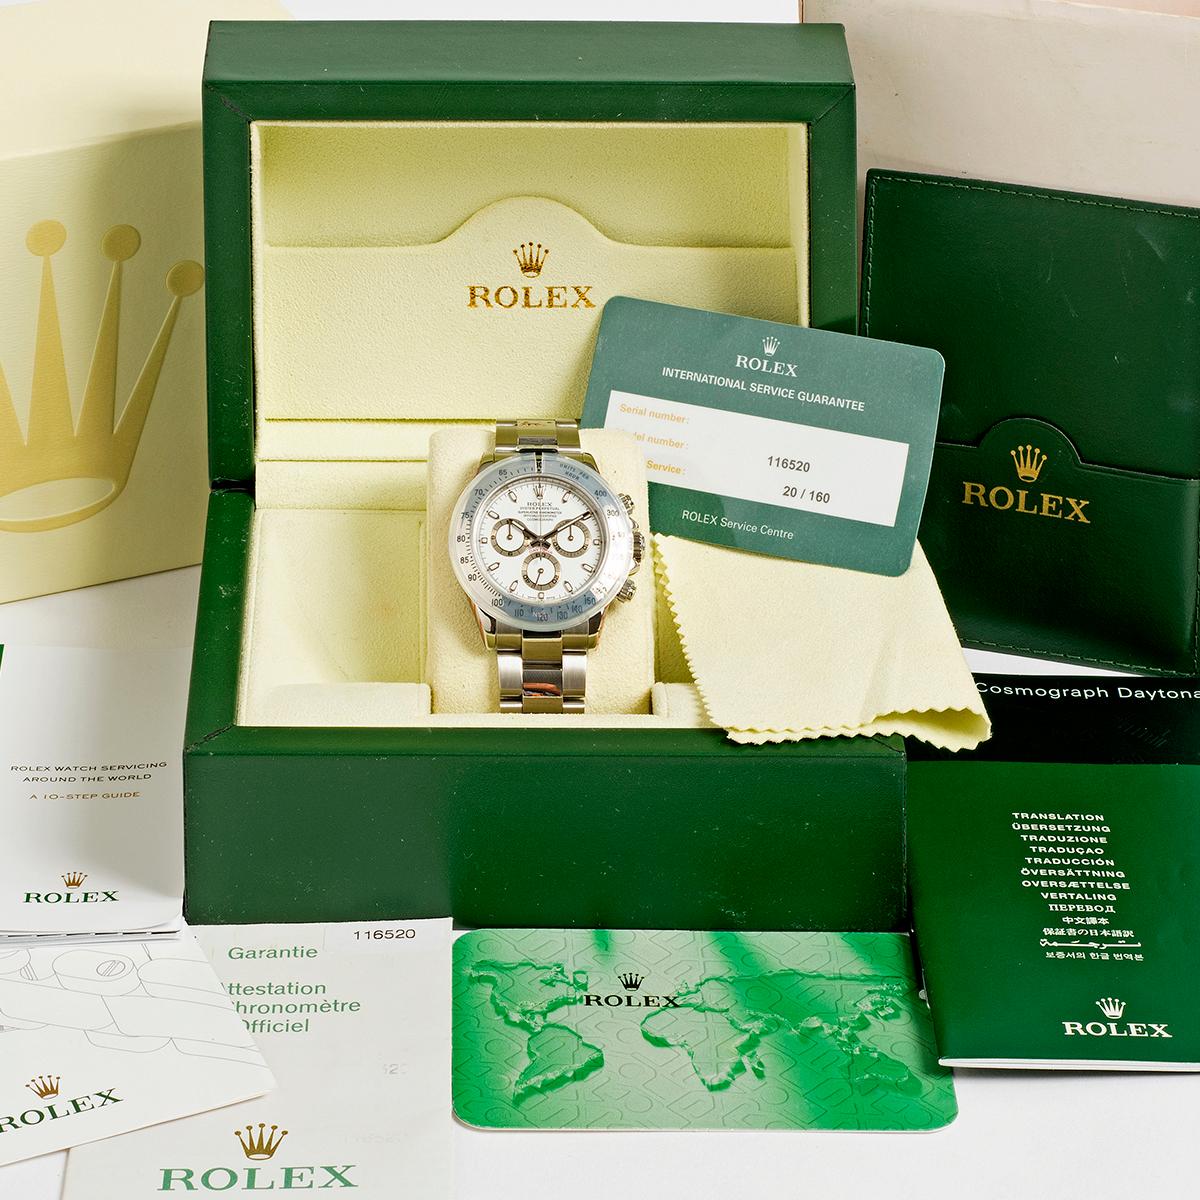 Our Rolex Daytona reference 116520 features a white dial and stainless steel case and Oyster bracelet. Benefitting from a complete service at Rolex Service Centre in 2020, our Daytona retains the remainder of the 2 year manufacturers warranty and